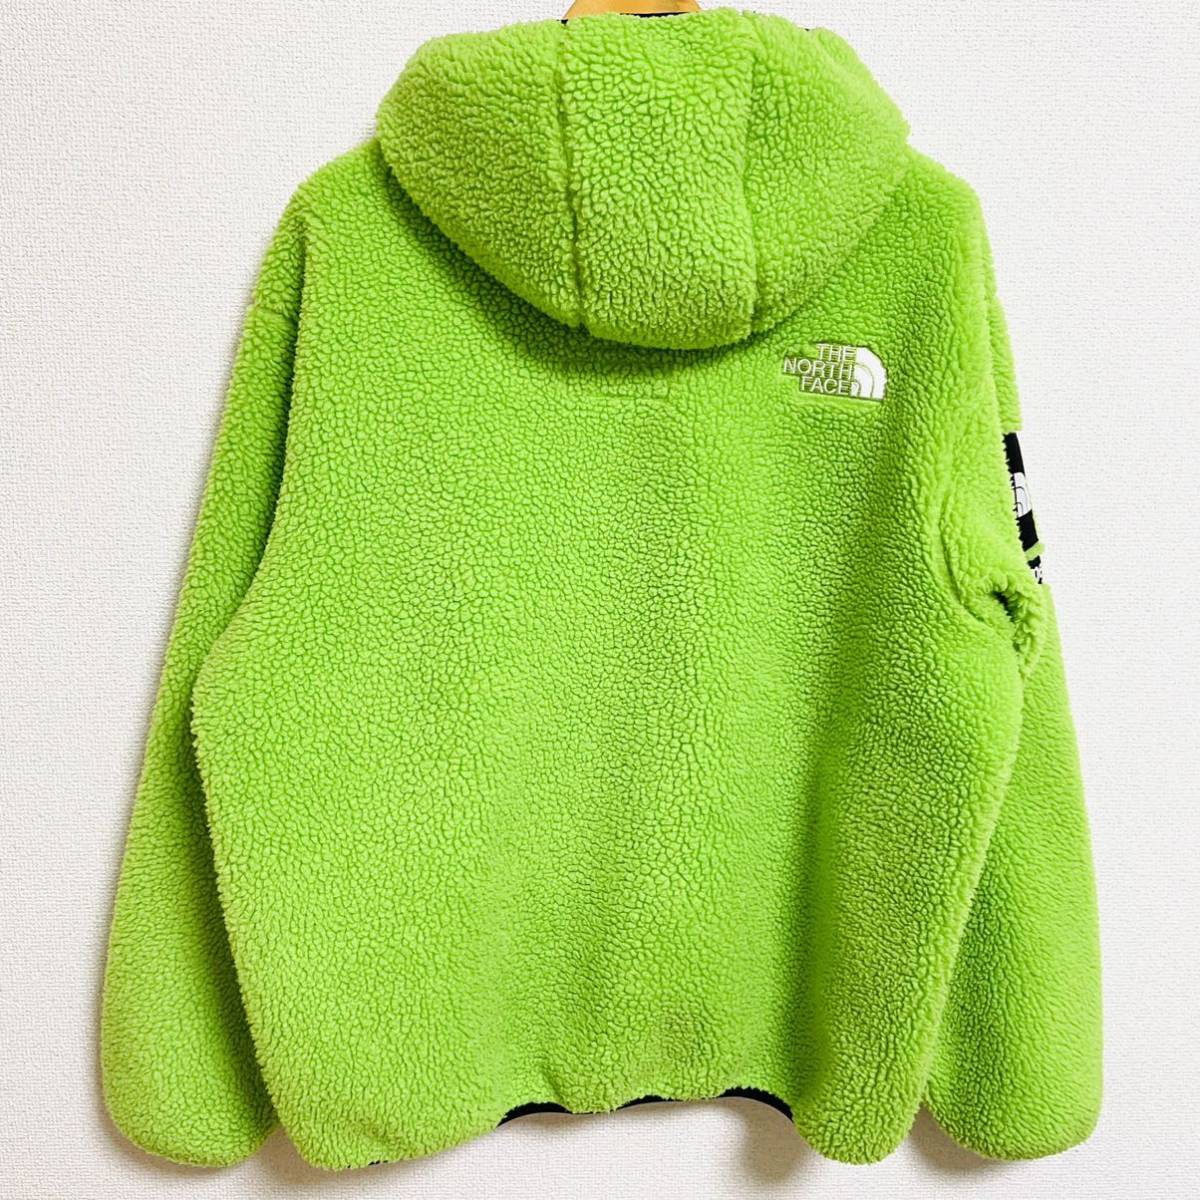 Supreme The North Face S Logo Hooded Fleece Jacket Lime White L 20aw 2020年 ライム グリーン 緑 白 Sロゴ フリース コラボ 納品書付き_画像2